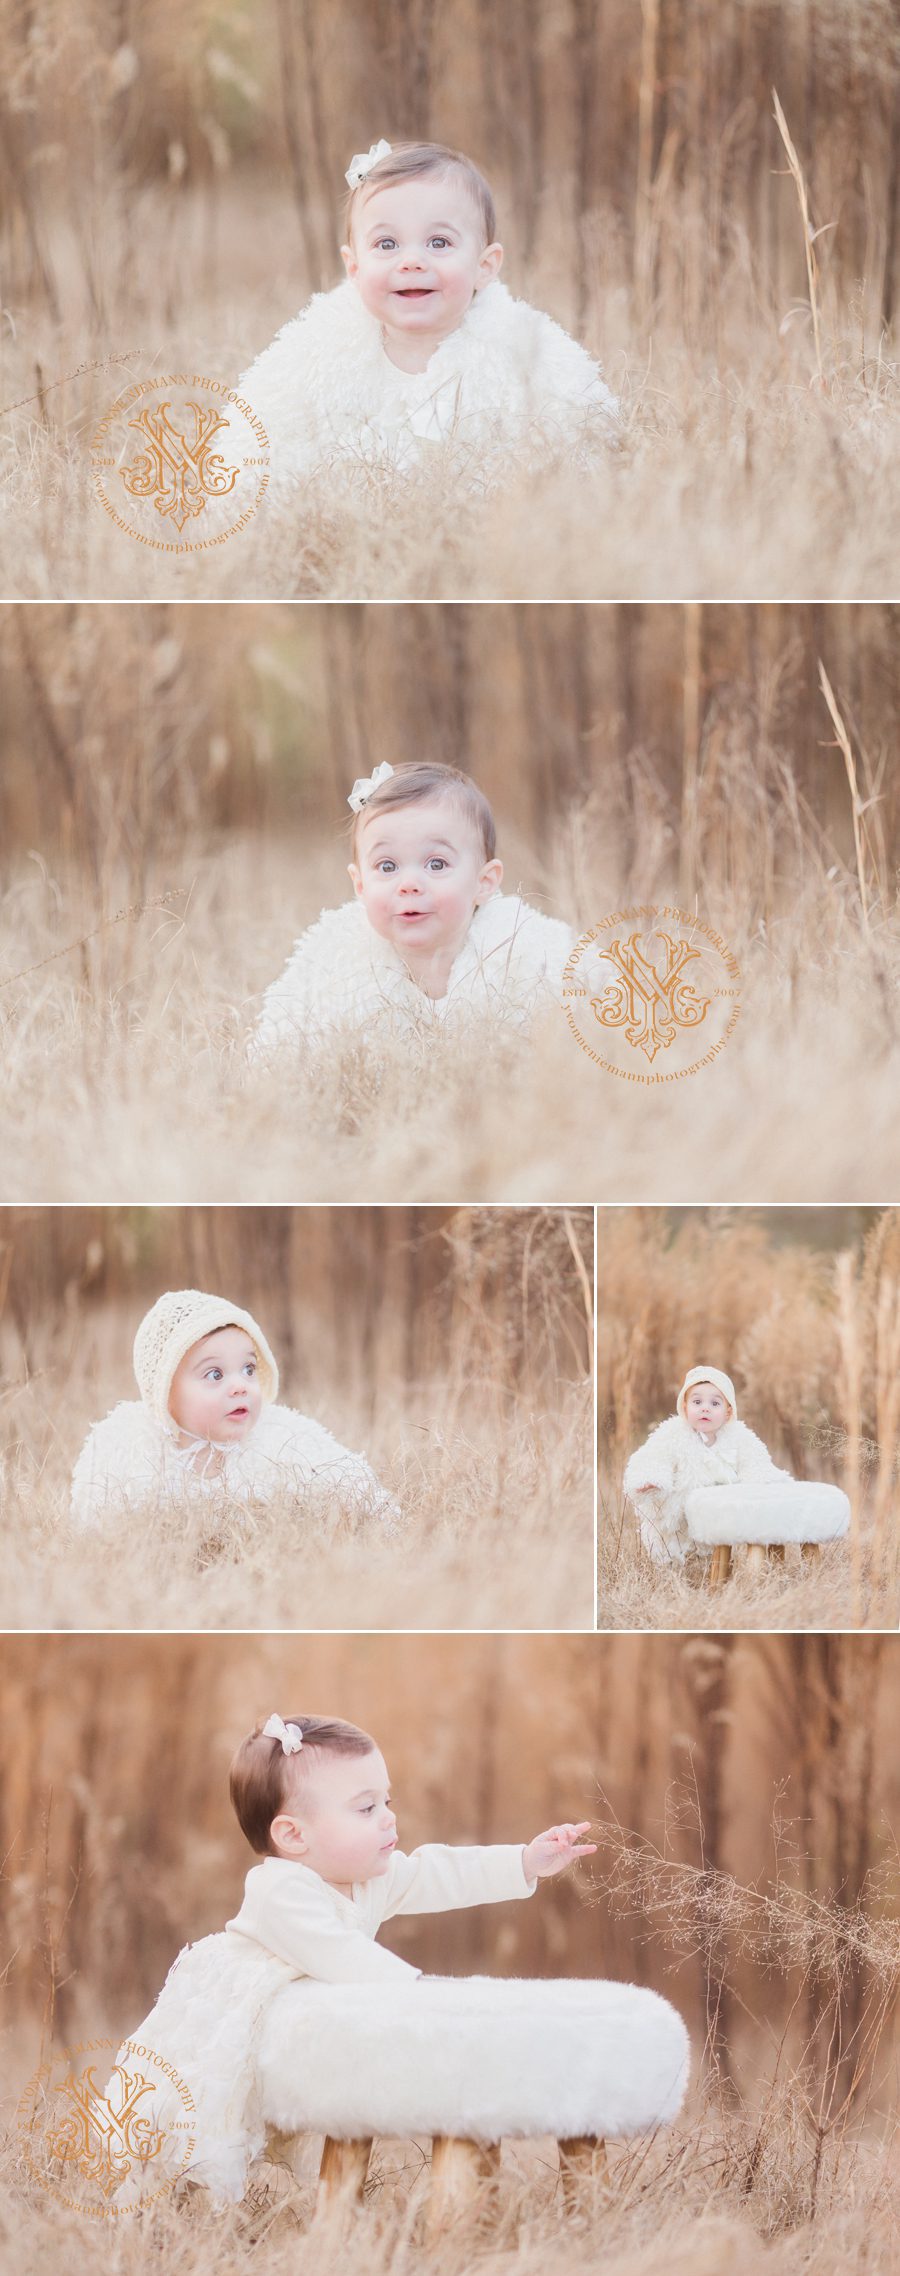 Nine month old baby girl in white fur, bonnet and dress in winter field near Athens, GA.